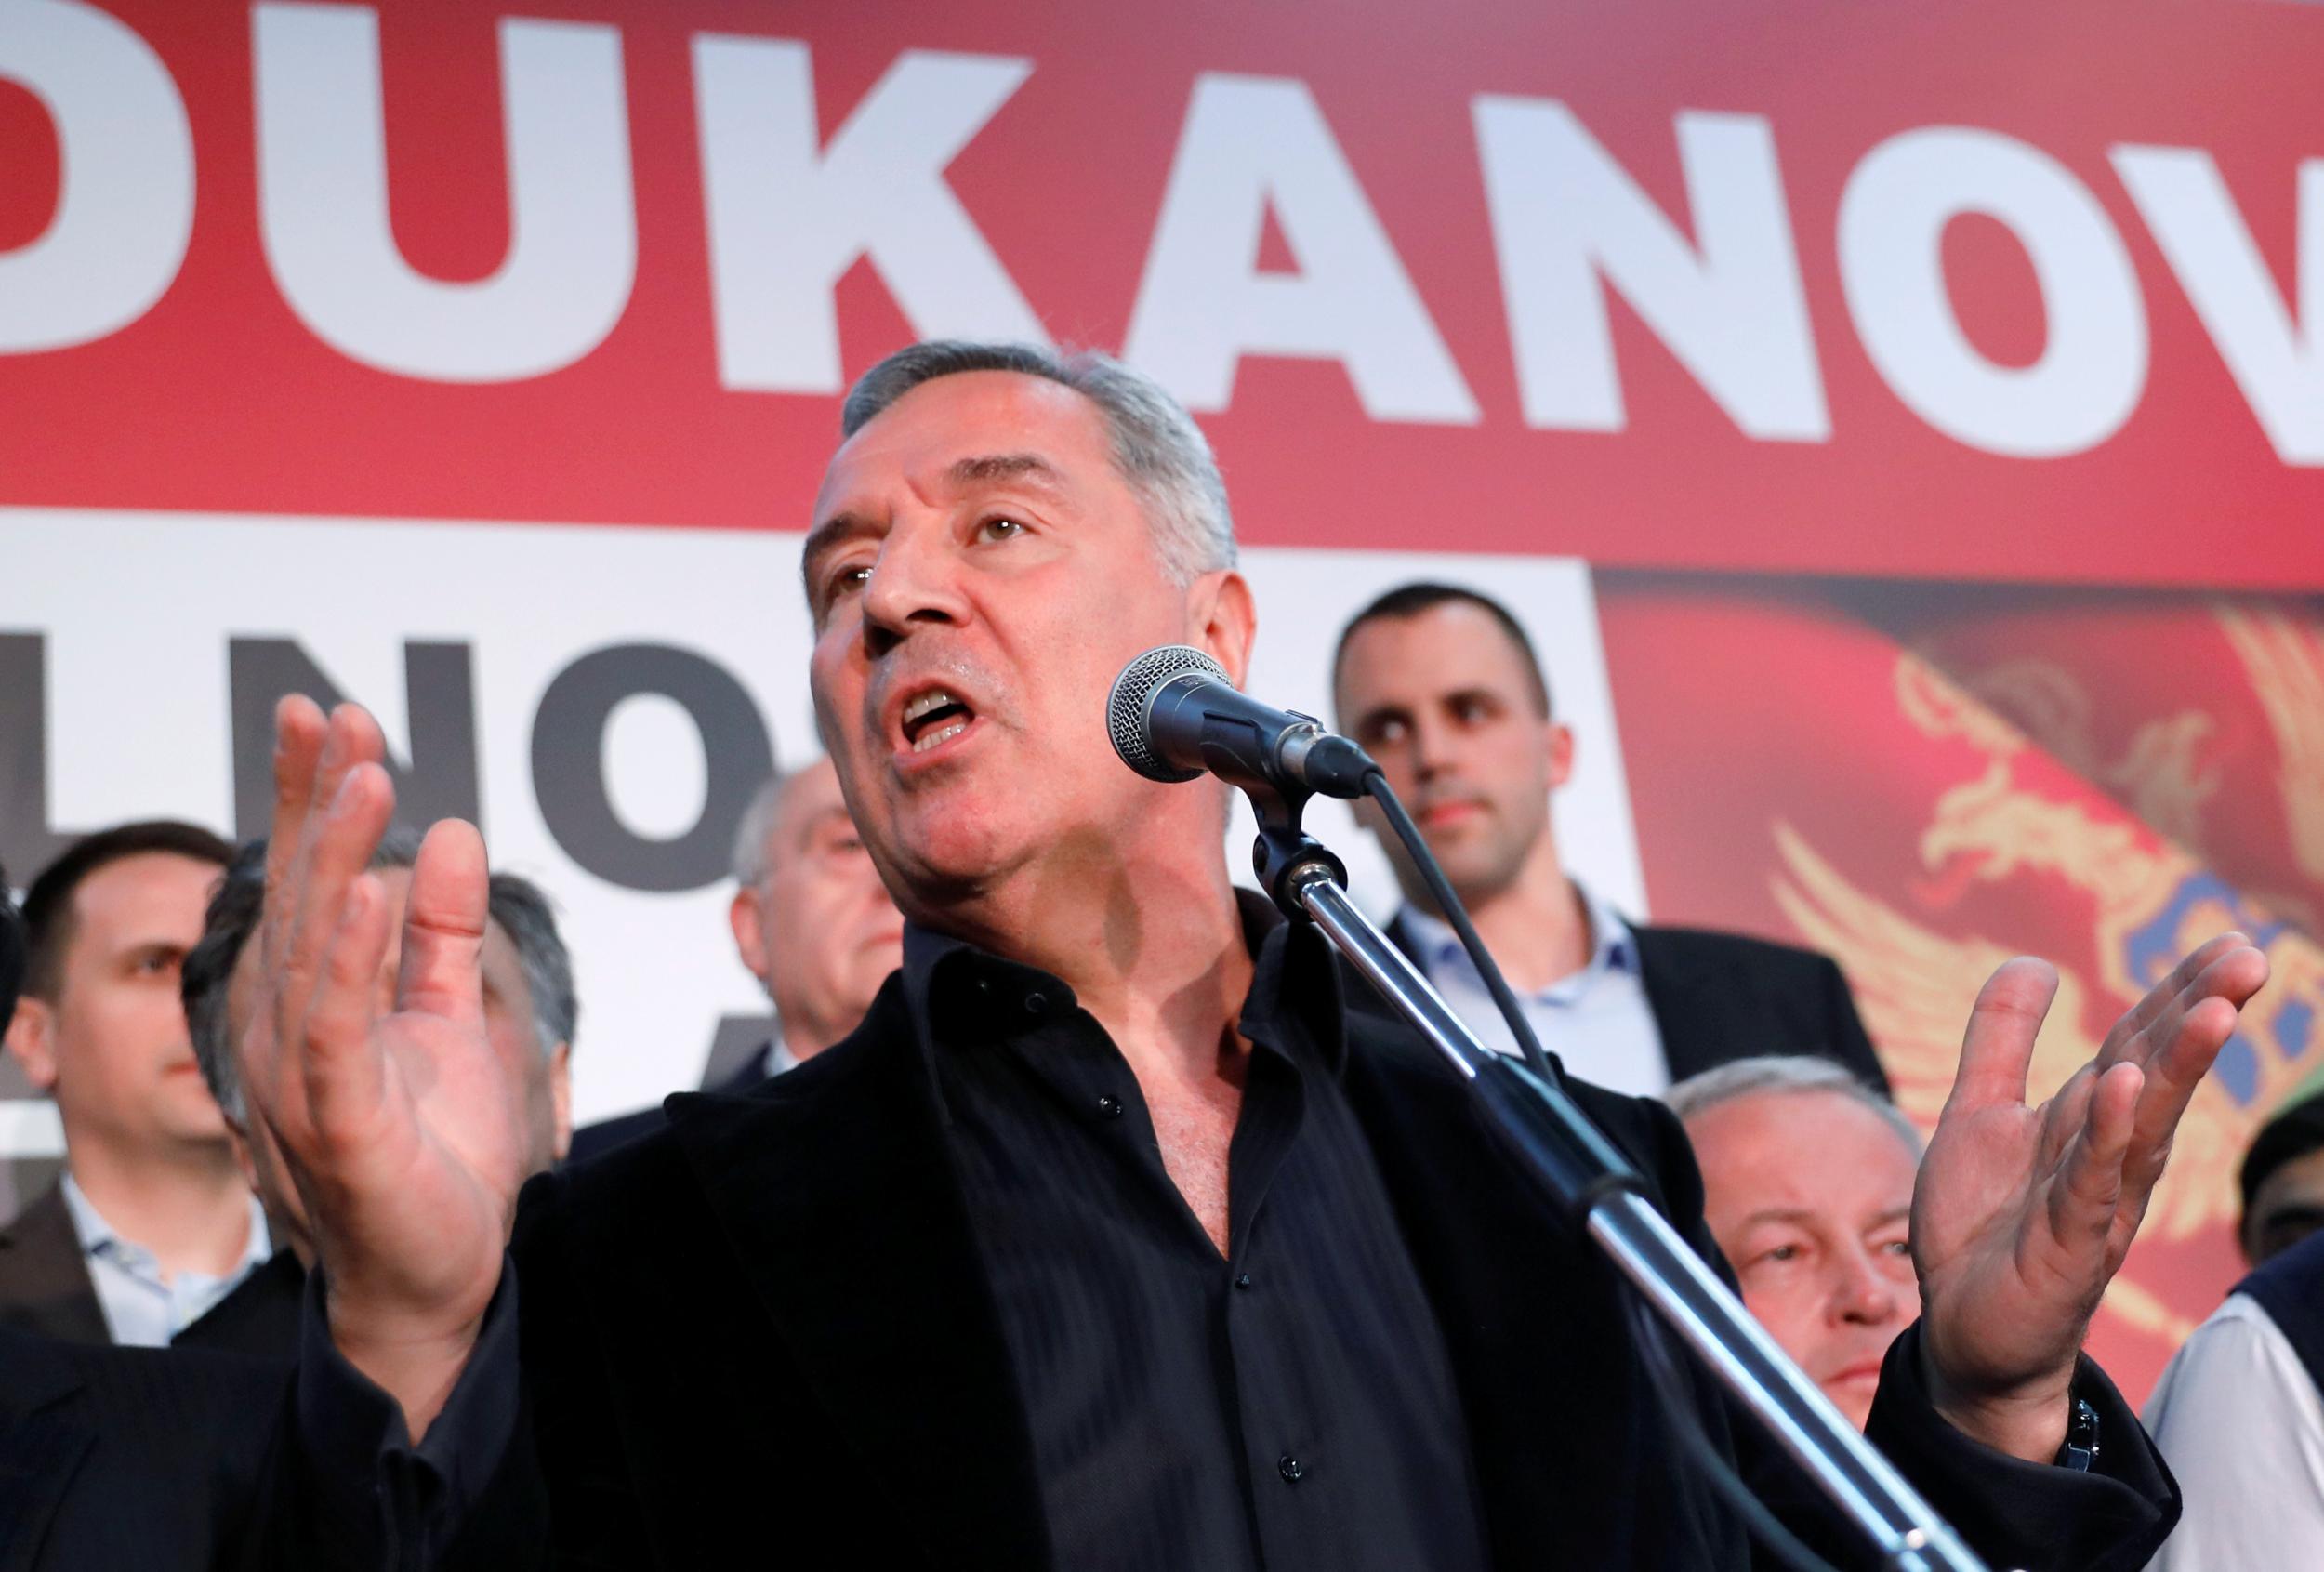 Milo Djukanovic speaks to supporters at his party headquarters in Podgorica, Montenegro